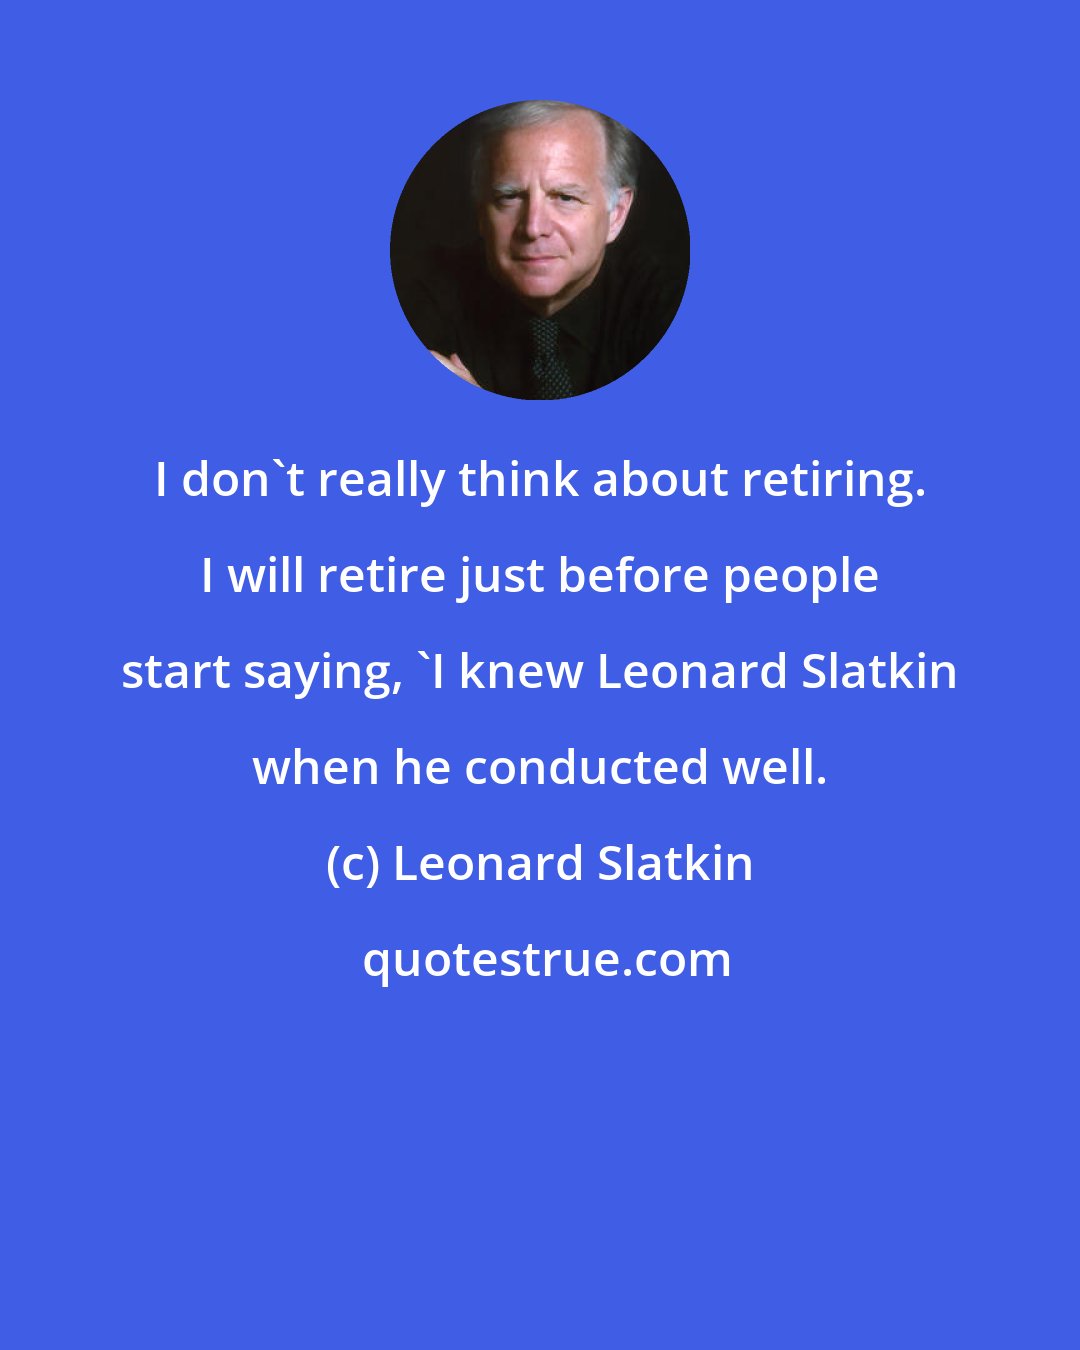 Leonard Slatkin: I don't really think about retiring. I will retire just before people start saying, 'I knew Leonard Slatkin when he conducted well.